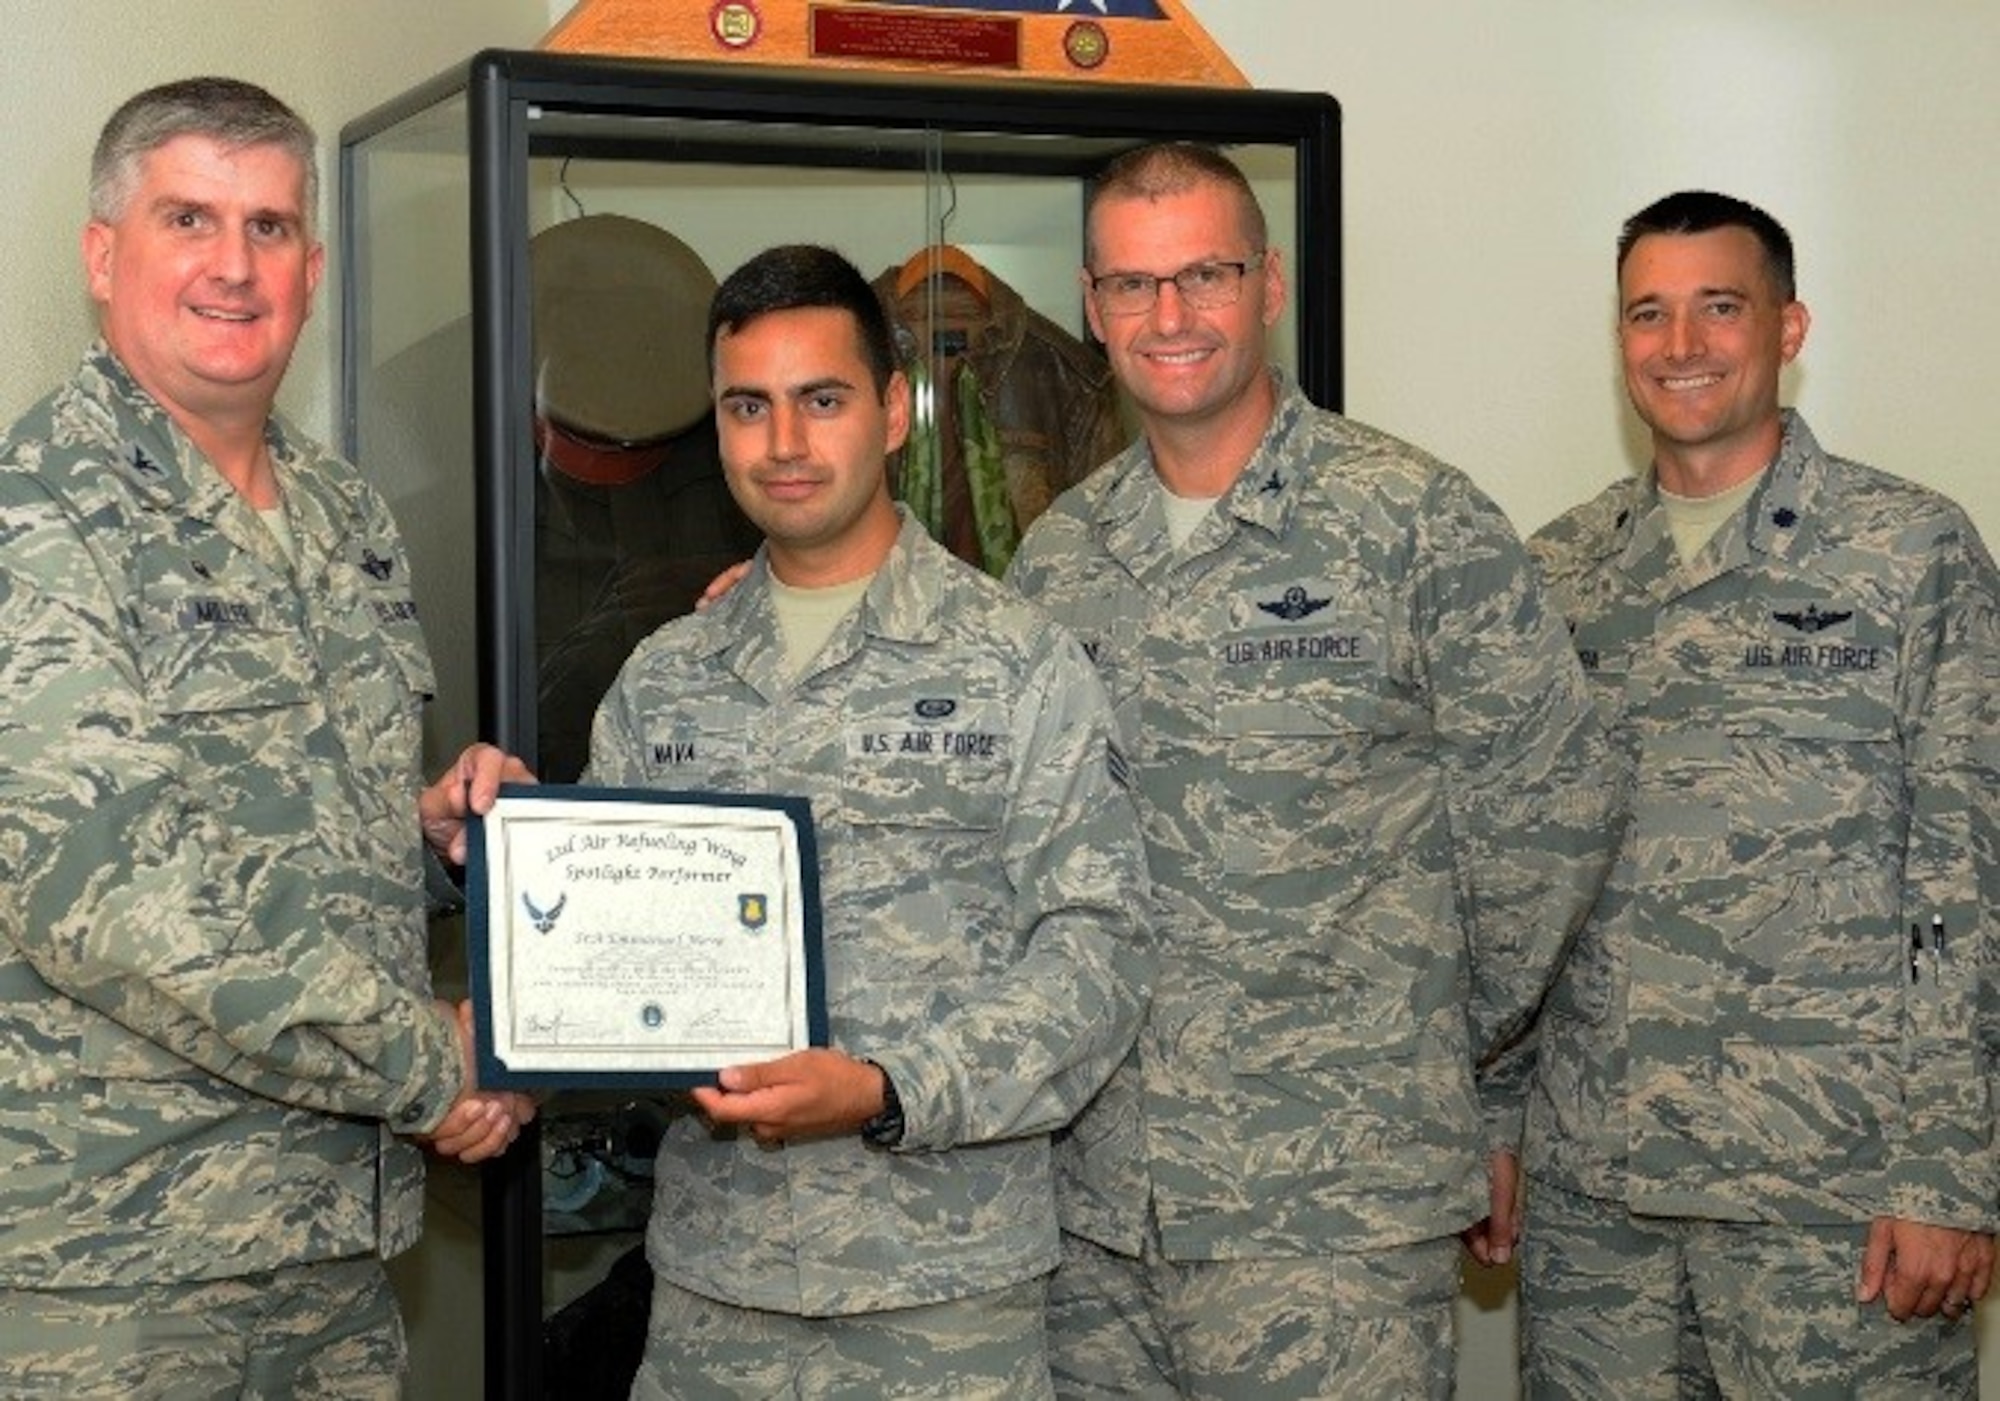 Senior Airman Emmanuel Nava, 22nd Operations Support Squadron intelligence standards and evaluations journeyman, poses with Col. Albert Miller, 22nd Air Refueling Wing commander, Col. Phil Hesseltine, 22nd ARW vice commander, and Lt. Col. Walenga, 22nd OSS commander, July 19, 2016, at McConnell Air Force Base, Kan. Nava received the spotlight performer for the week of June 6-10. (U.S. Air Force photo/Senior Airman David Bernal Del Agua)